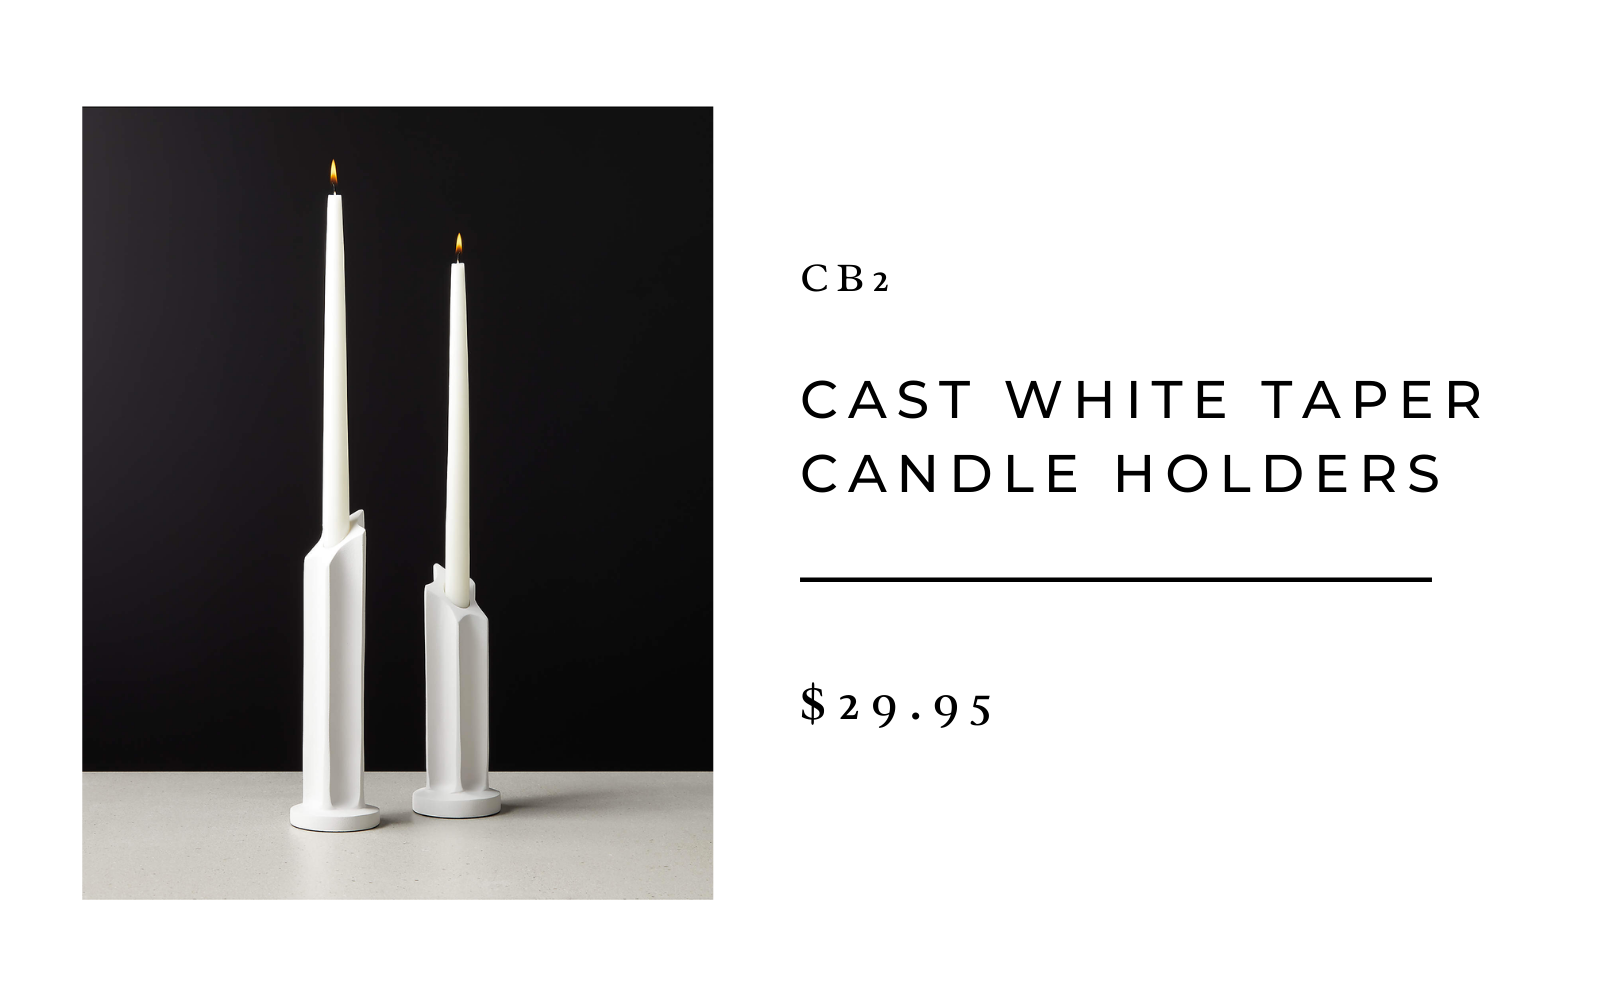 CB2 Cast White Taper Candle Holders